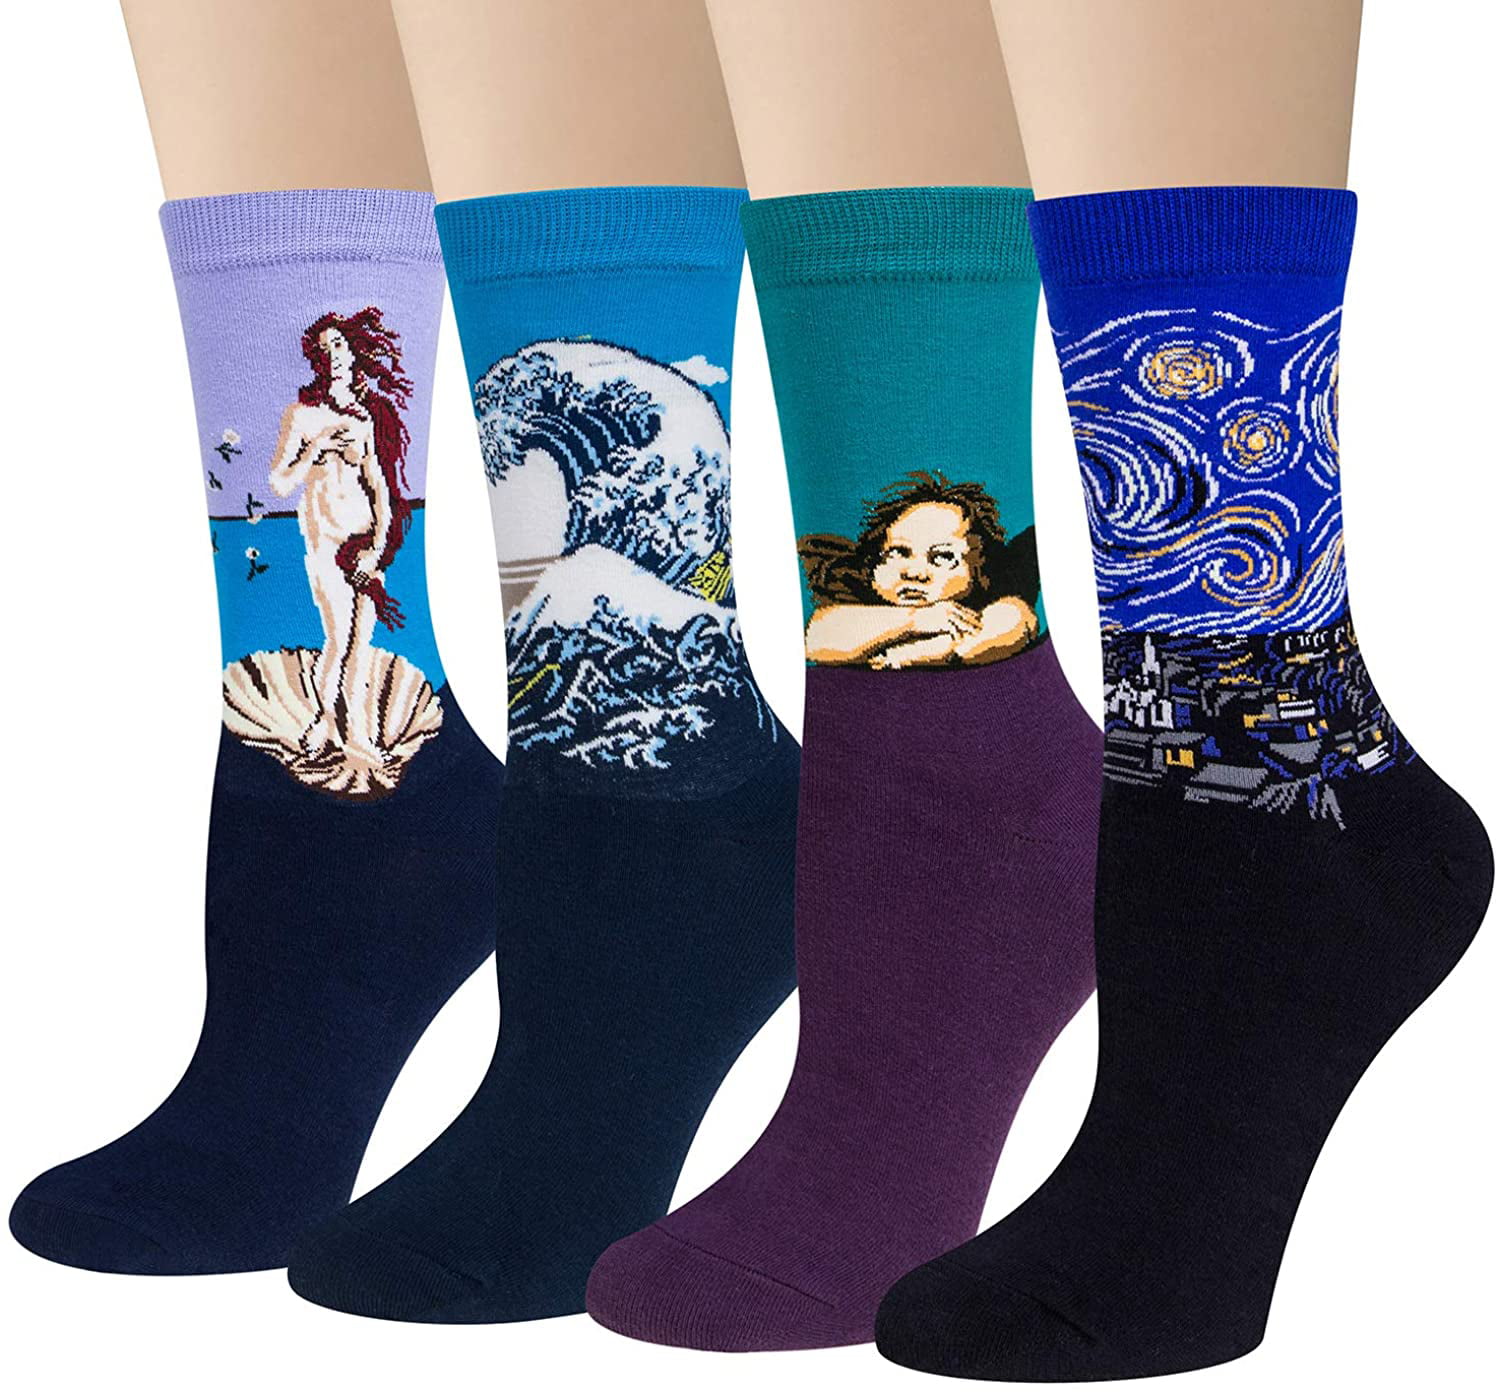 Crazy Plant Lady Groovy Things Women's Crew Socks New Novelty Snarky Fashion